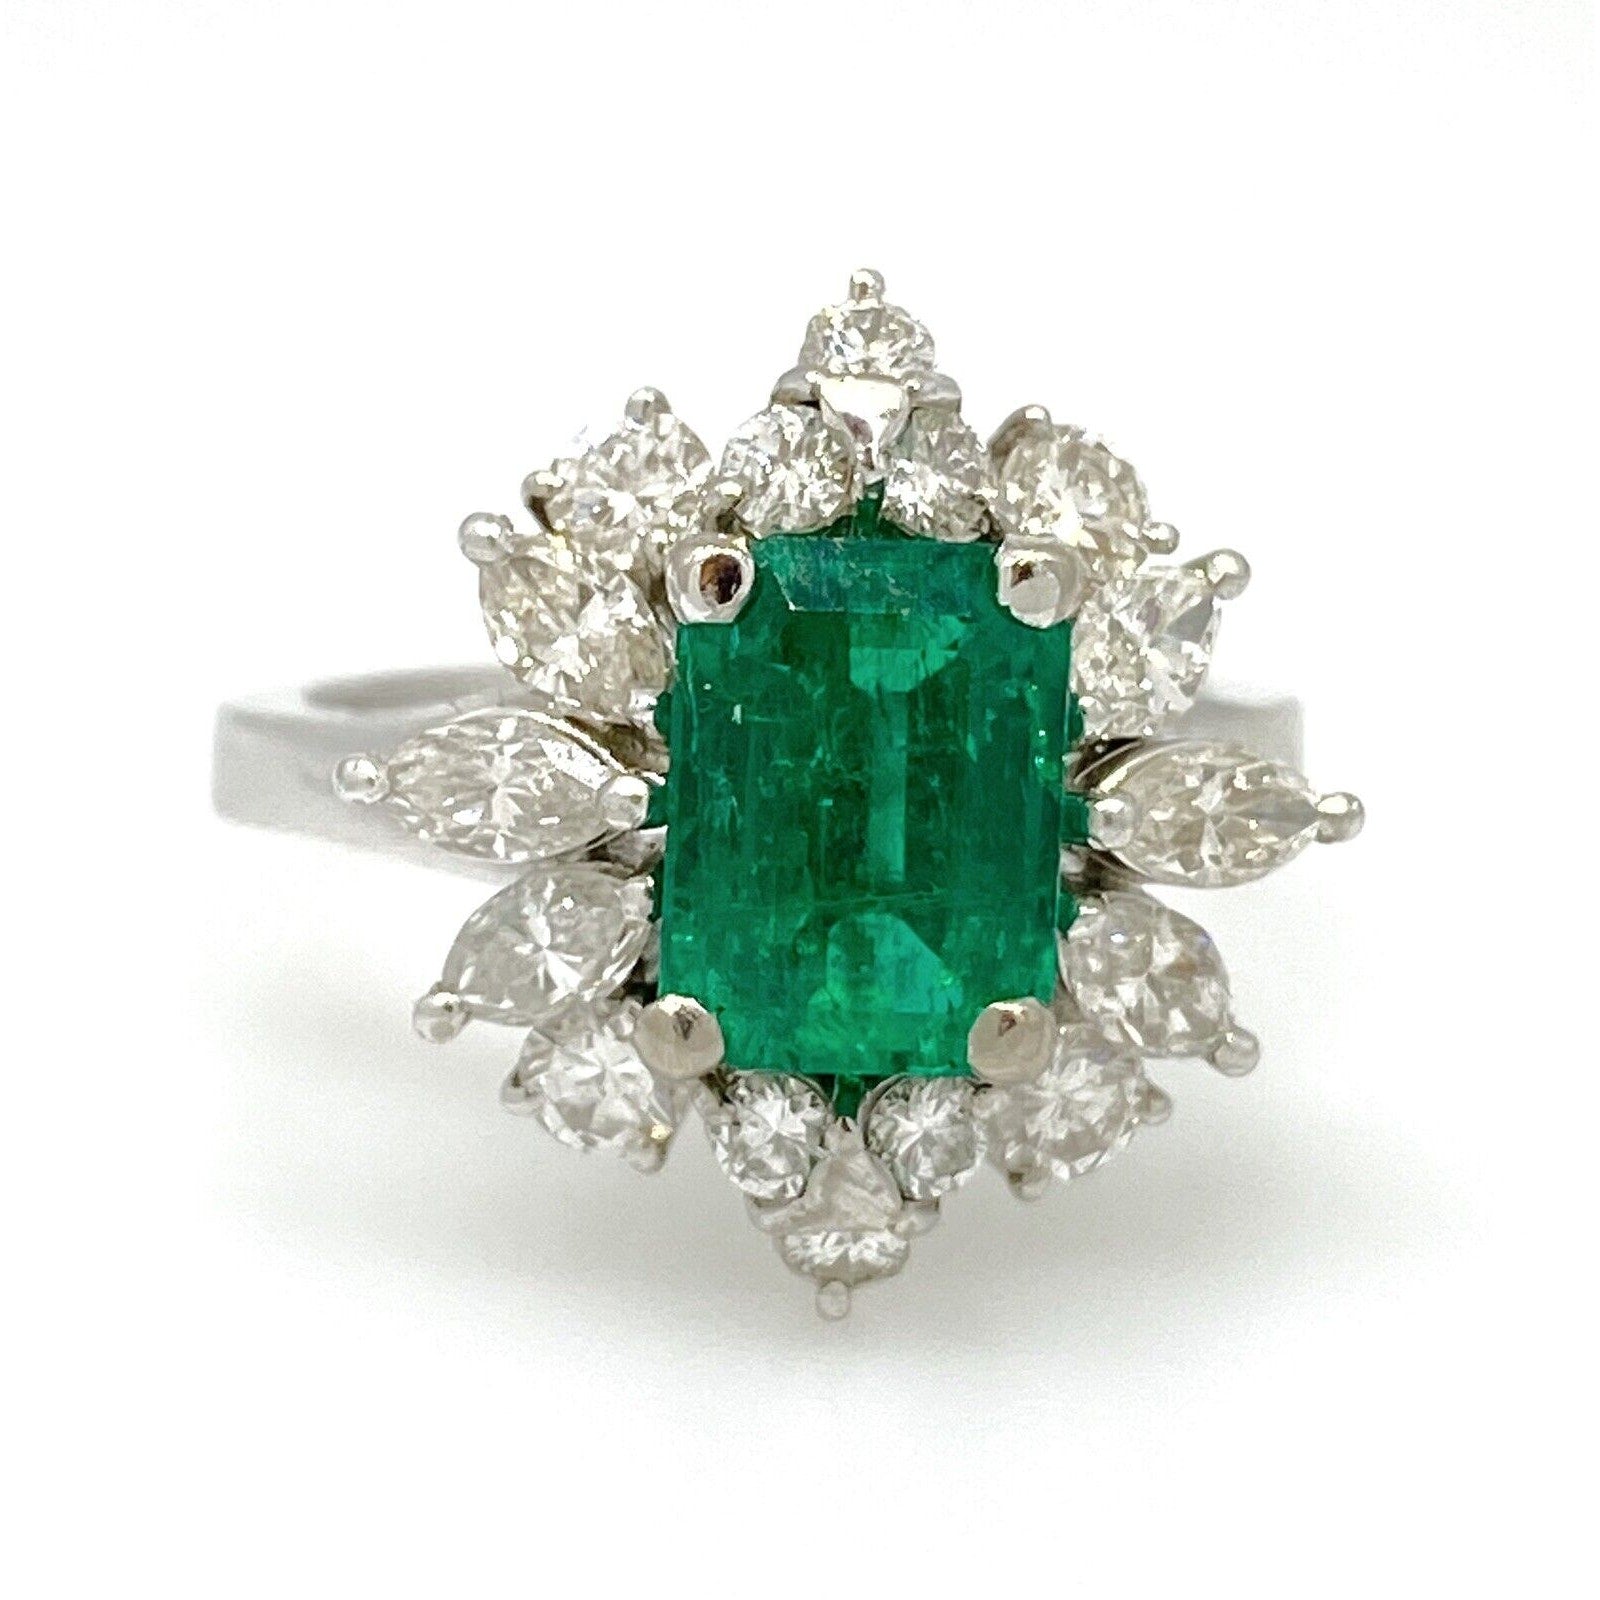 GIA 1.62 cts Colombian Emerald & Diamond Ballerina Ring 18k White Gold -HM2083BE